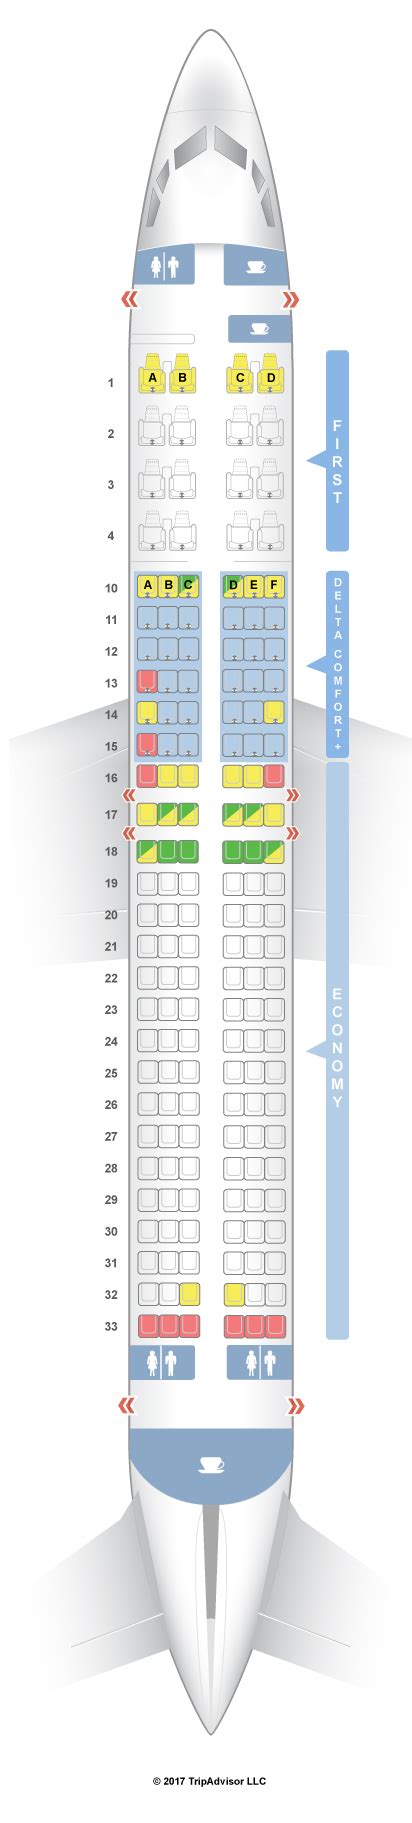 The Southwest Boeing 737 Max 8 seat map features a 3-3 seat arrangement and 175 seats in the Economy cabin. Even though this configuration is typical for planes of this kind, a passenger's height can affect how much legroom they have. Although the Economy pitch, which is 32 inches, is average, some passengers may find it congested .... 